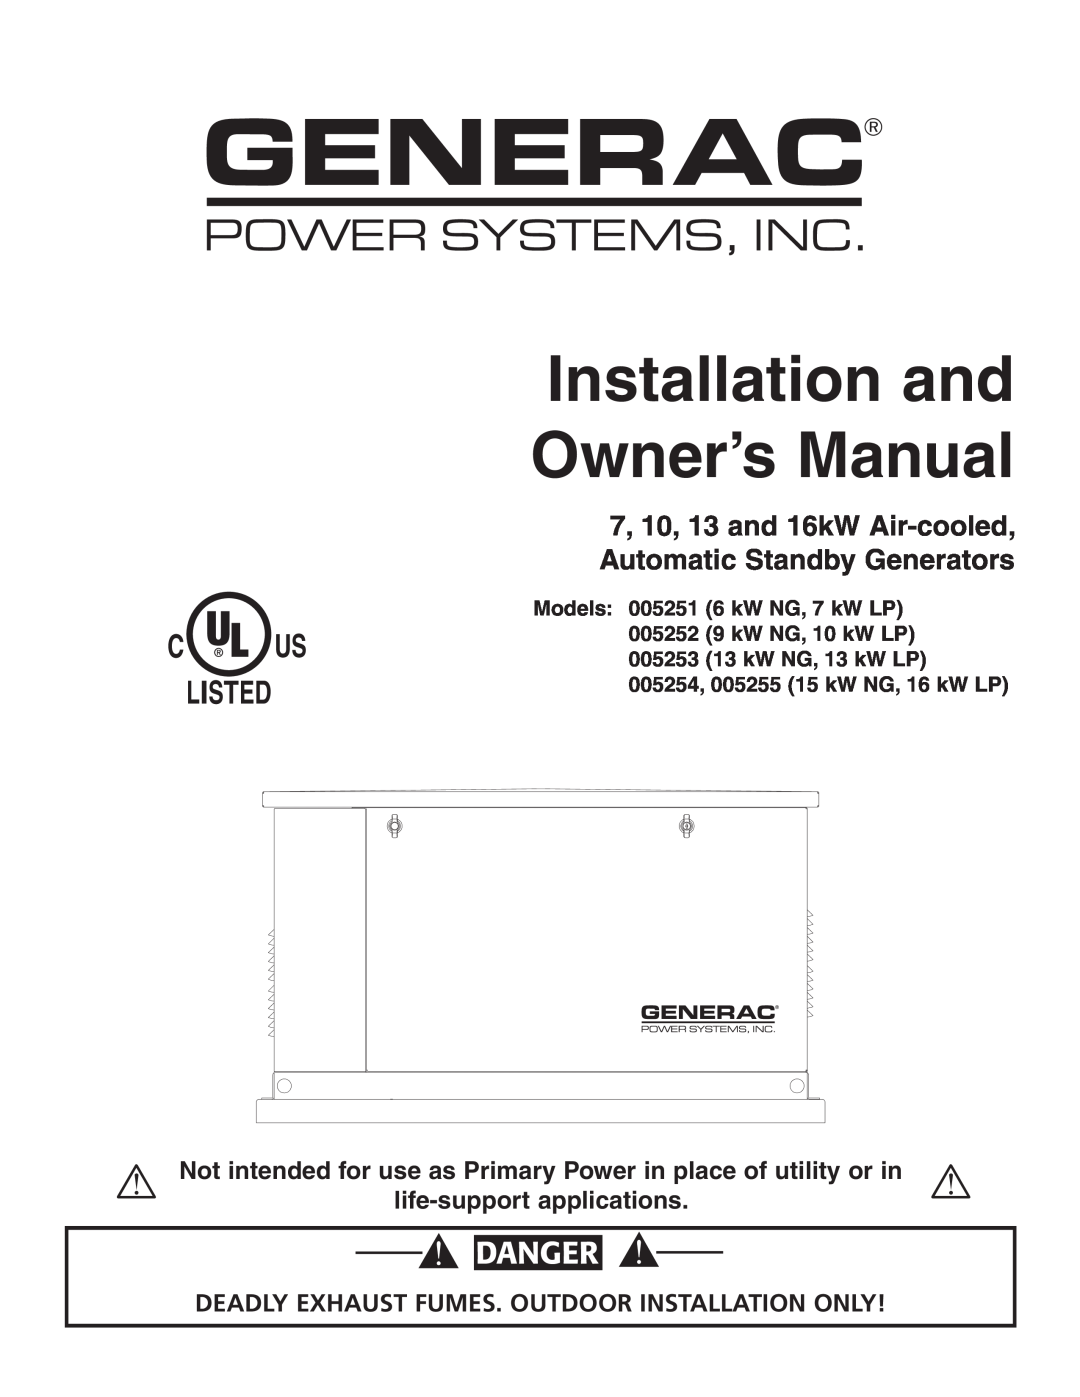 Generac Power Systems 5254 owner manual Installation and Owner’s Manual, C Us Listed, Danger, life-support applications 